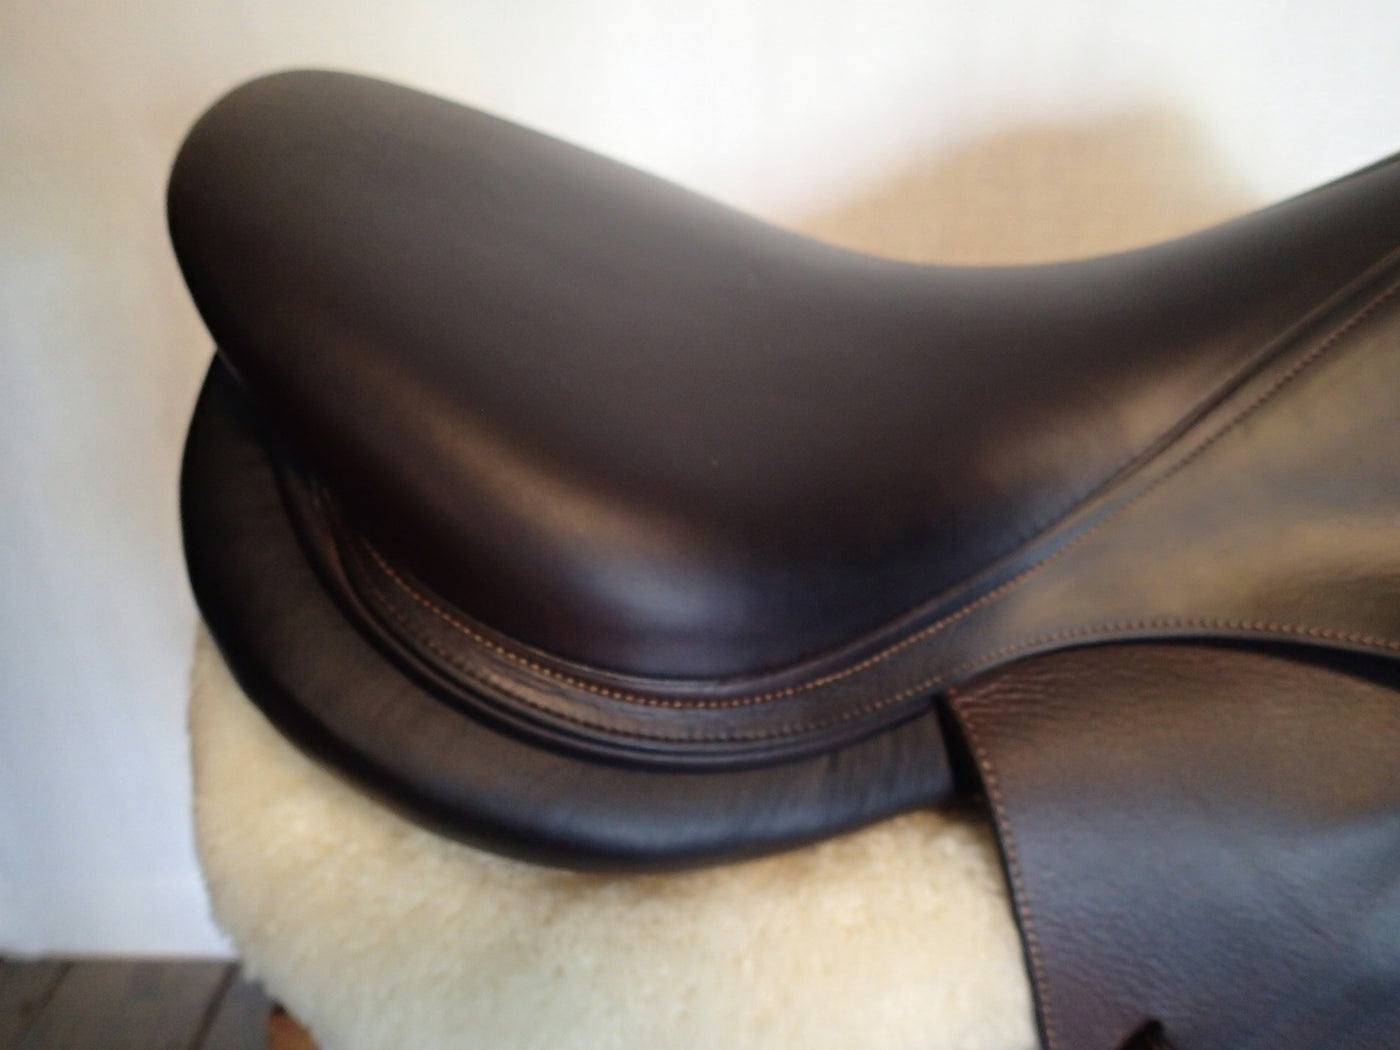 18" Voltaire Palm Beach Saddle - 2017 - 3AA Flaps - 4.75" dot to dot - Pro Panels